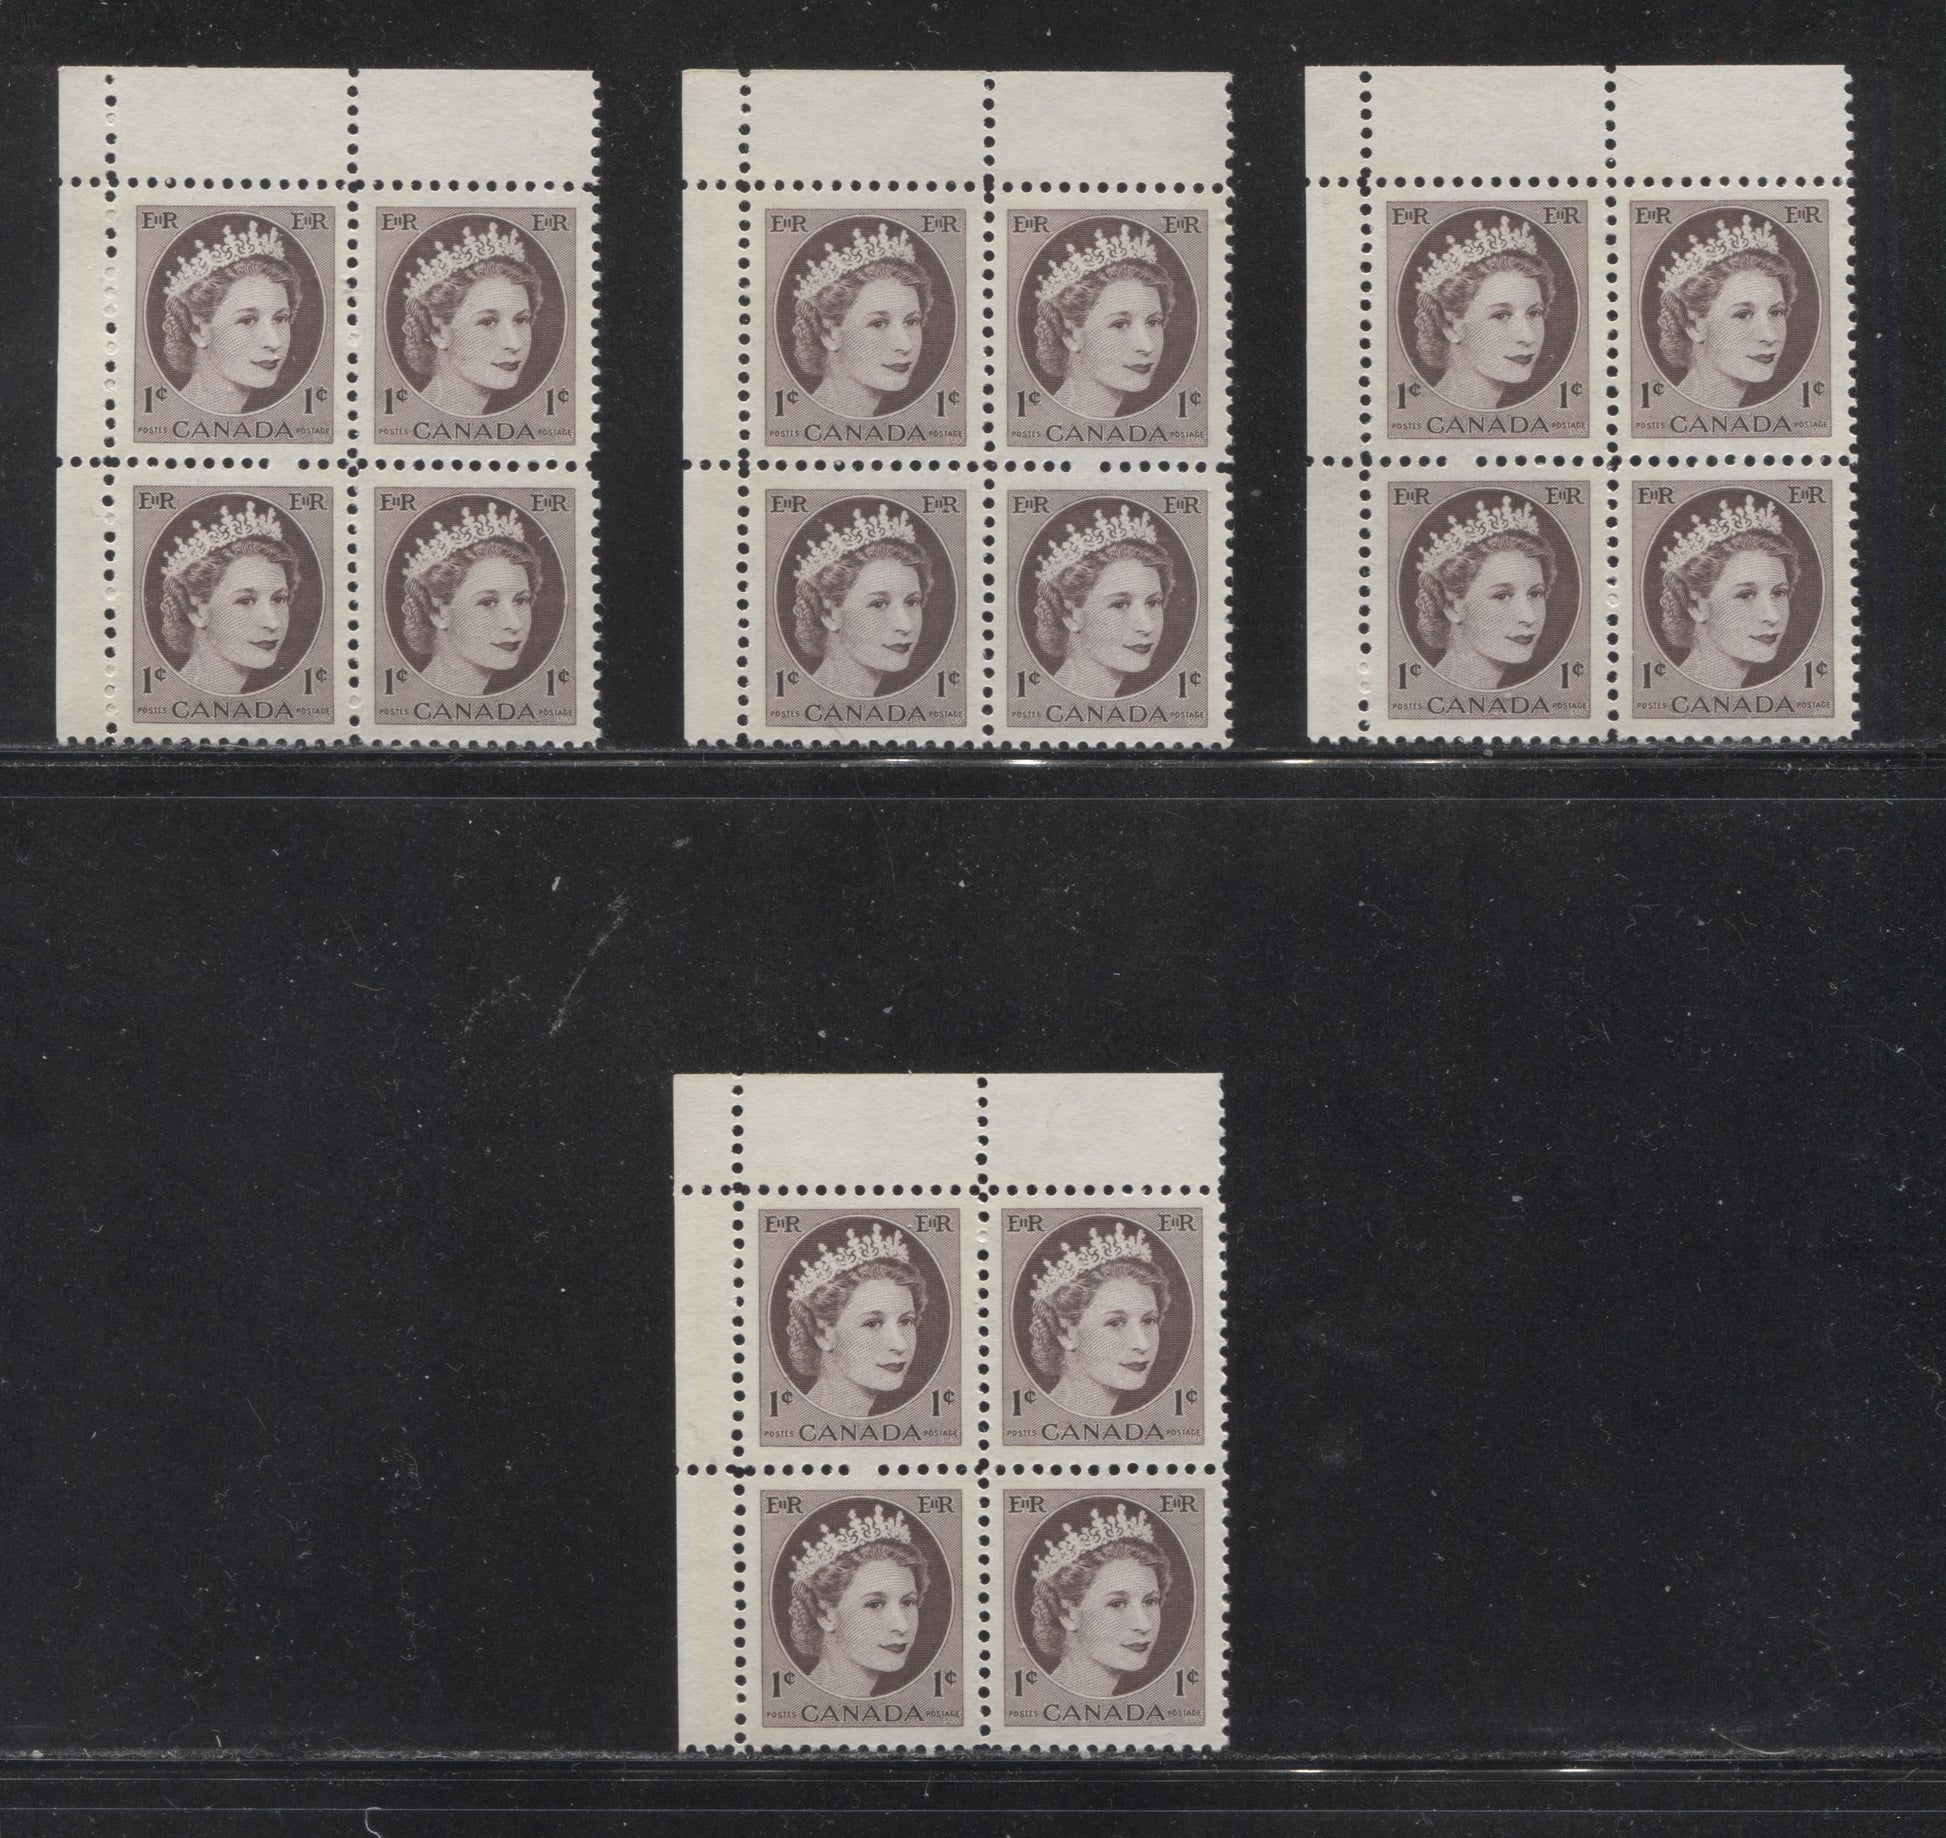 Canada #337p(var) 1c Chocolate Queen Elizabeth II, 1954-1962 Wilding Issue, Upper Left Blank Winnipeg Tagged Blocks of 4, Four Different, Various Perfs., DF Gr Vertically Ribbed Paper, Streaky Semi Gloss Gum, Bluish White Tagging, Broken Perf. Pins, VFNH Brixton Chrome 